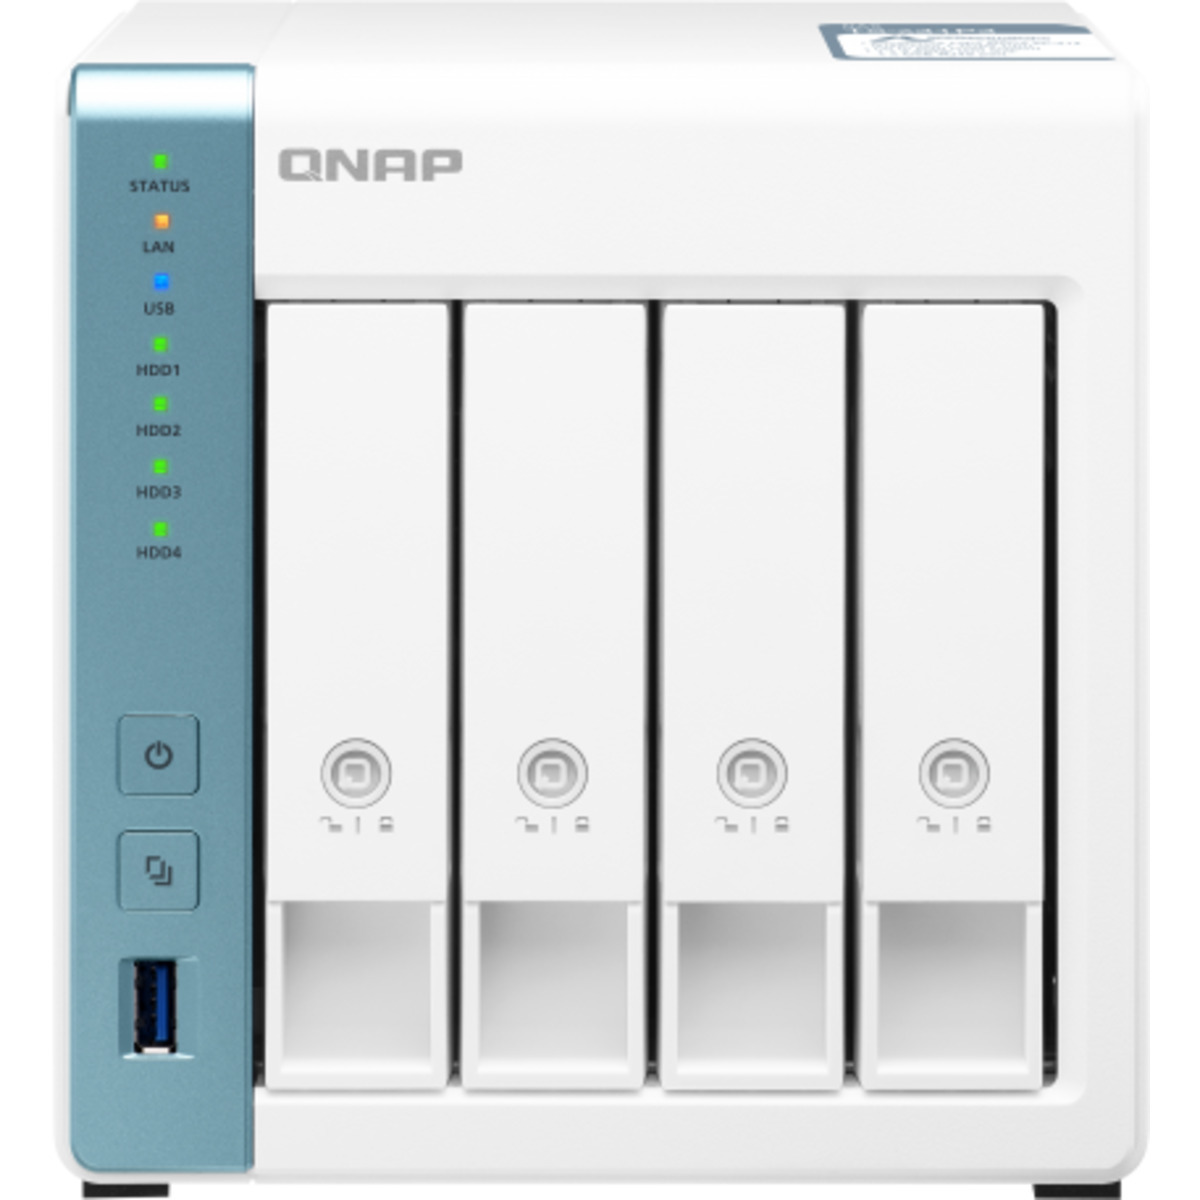 buy $778 QNAP TS-431P3 16tb Desktop NAS - Network Attached Storage Device 4x4000gb Toshiba MN Series MN08ADA400E 3.5 7200rpm SATA 6Gb/s HDD NAS Class Drives Installed - Burn-In Tested - ON SALE - FREE RAM UPGRADE - nas headquarters buy network attached storage server device das new raid-5 free shipping simply usa TS-431P3